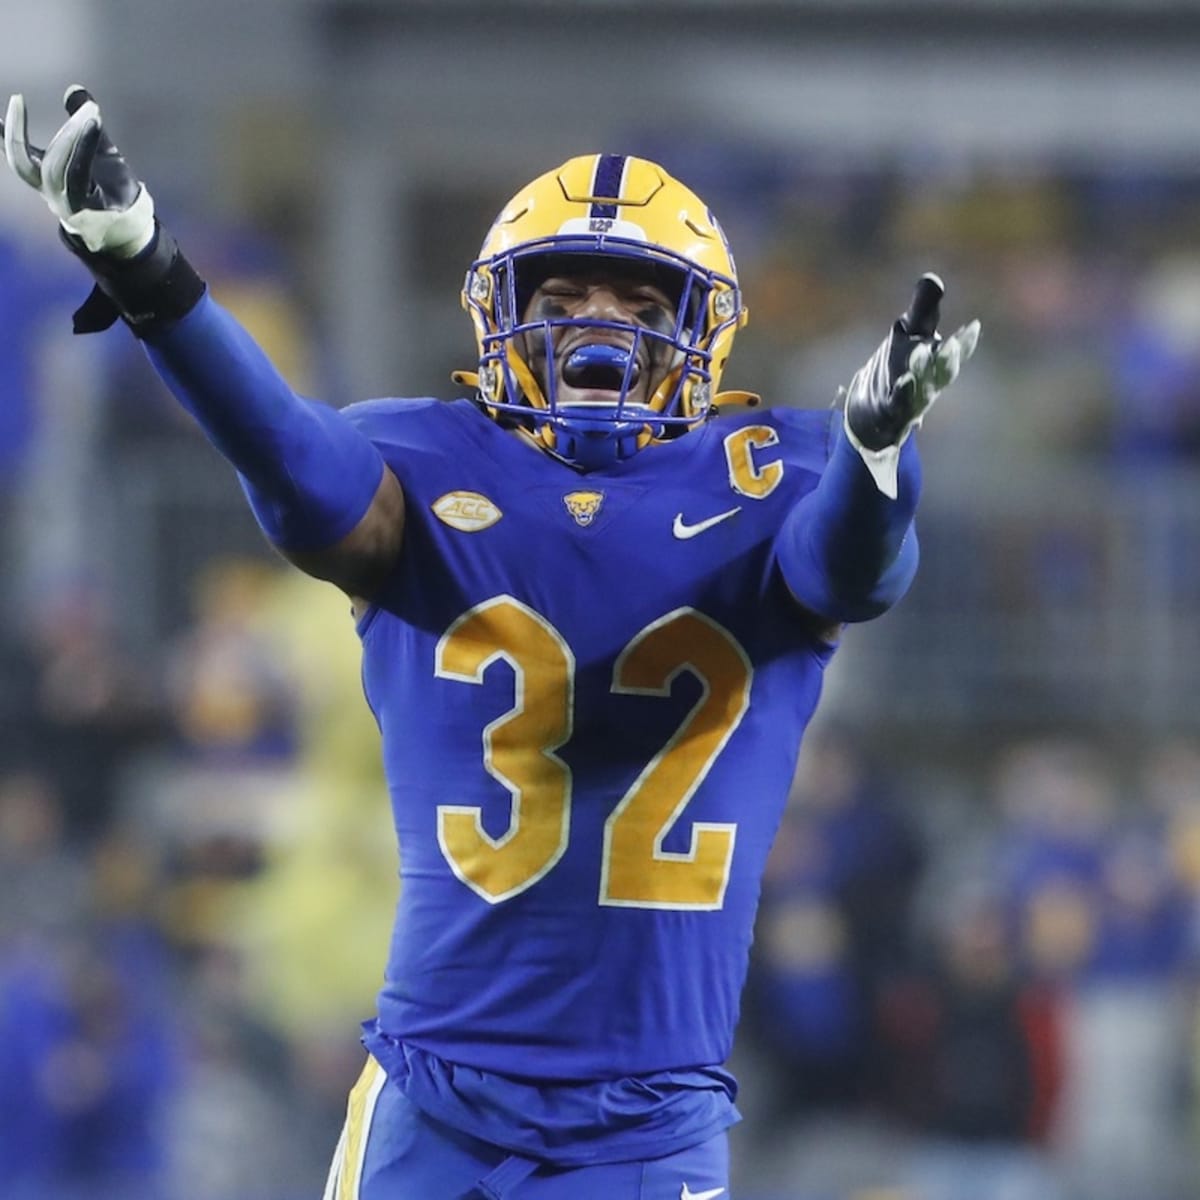 Gallery: Pitt's New All-Blue Uniforms - Pittsburgh Sports Now